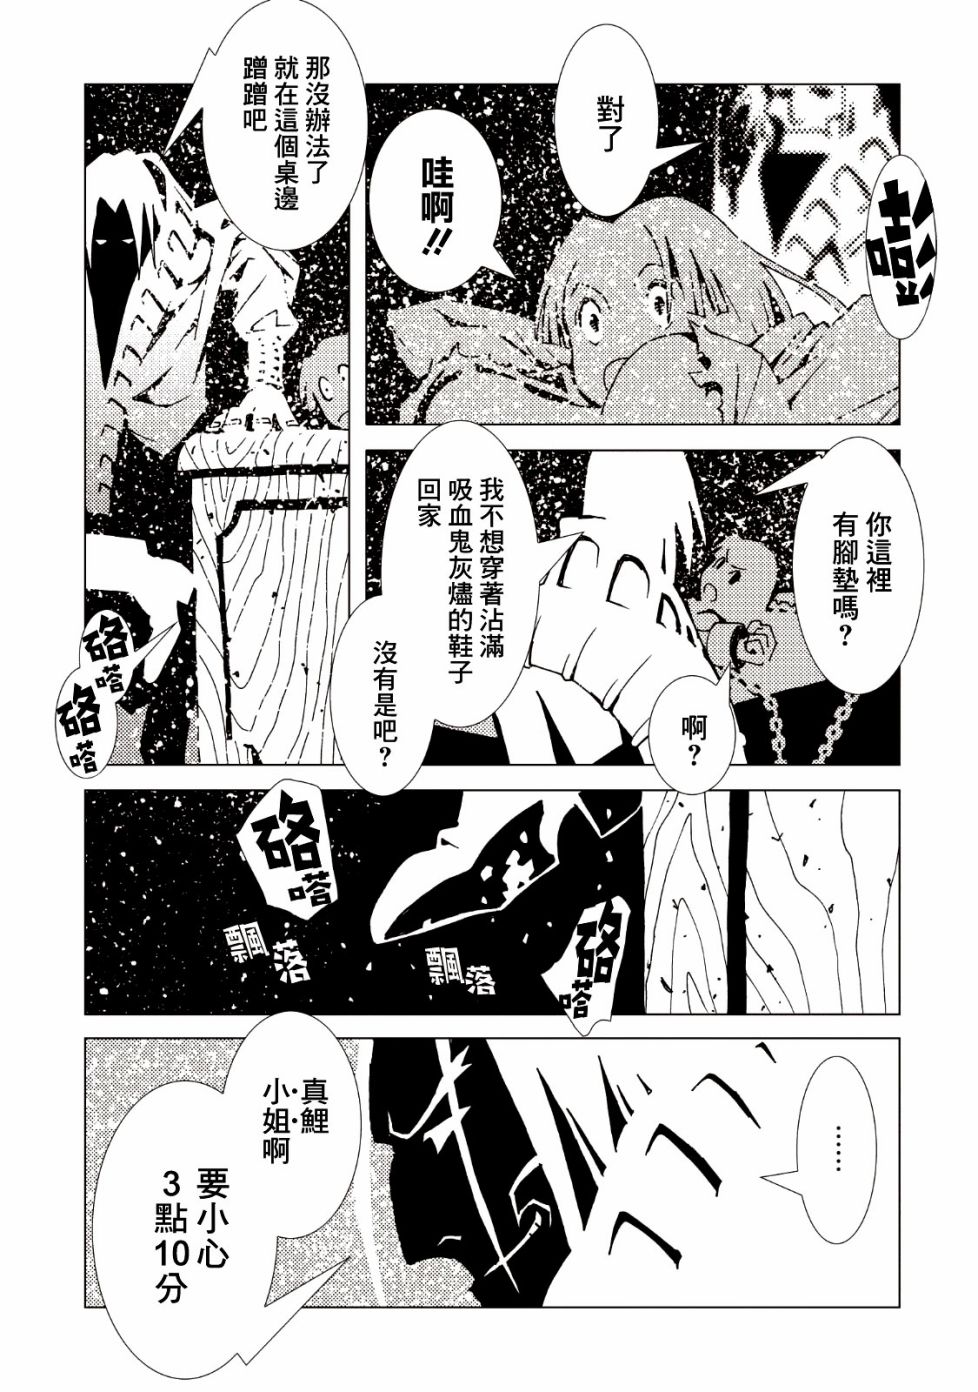 AREA51 - 第37話 - 8